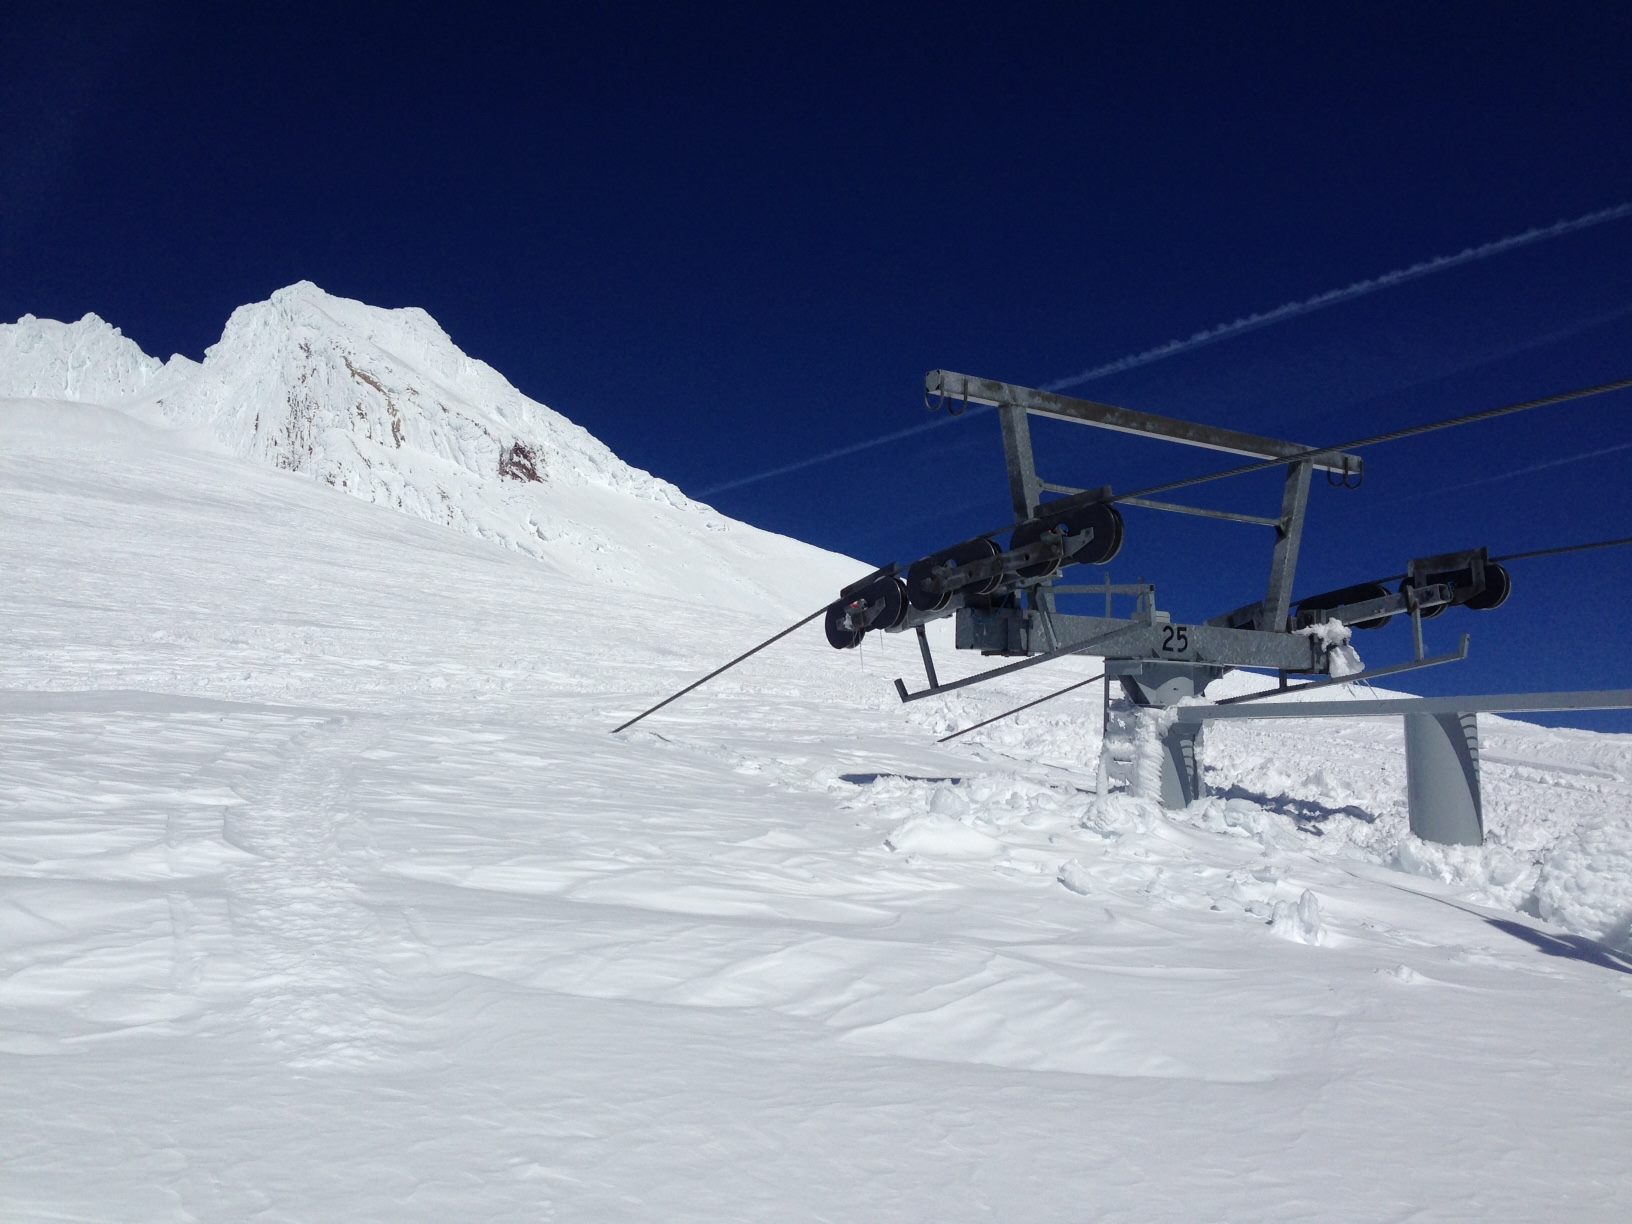 The Palmer chairlift at Timberline Lodge, OR on March 18th. It's gonna be a great spring and summer at Timberline this year. photo: timberline